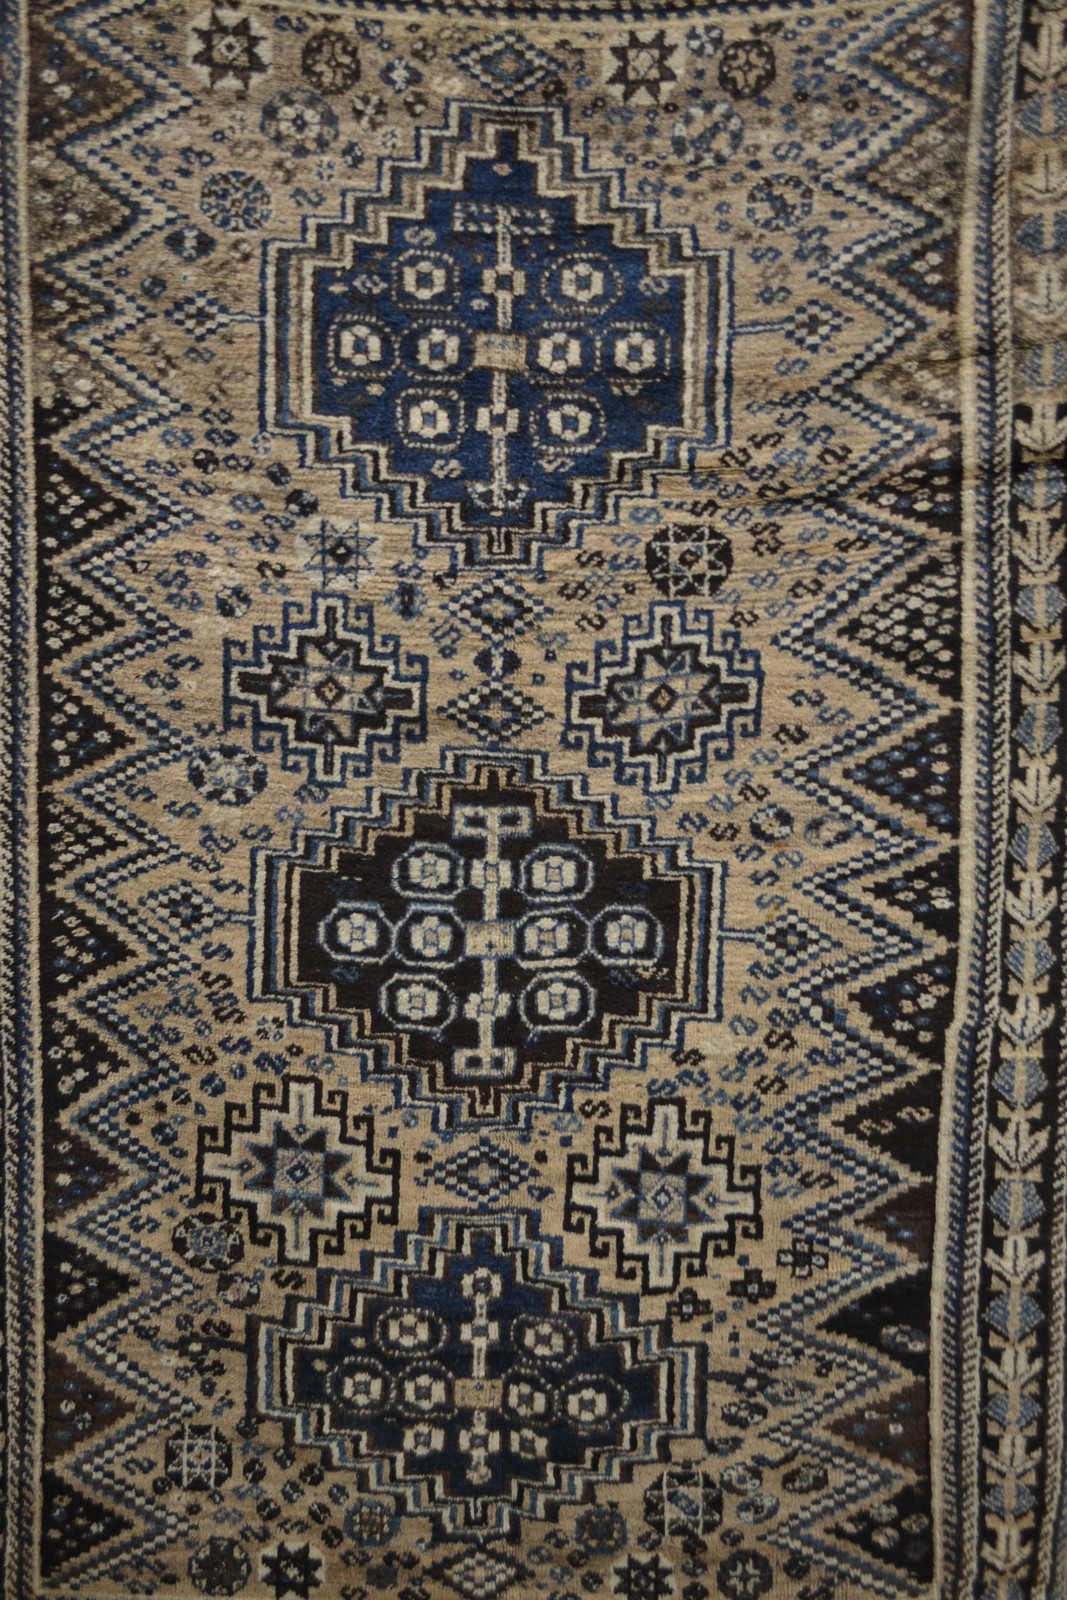 Fars rug, Shiraz region, south west Persia, mid-20th century, 7ft. 10in. x 5ft. 2.39m. x 1.52m. - Image 2 of 3